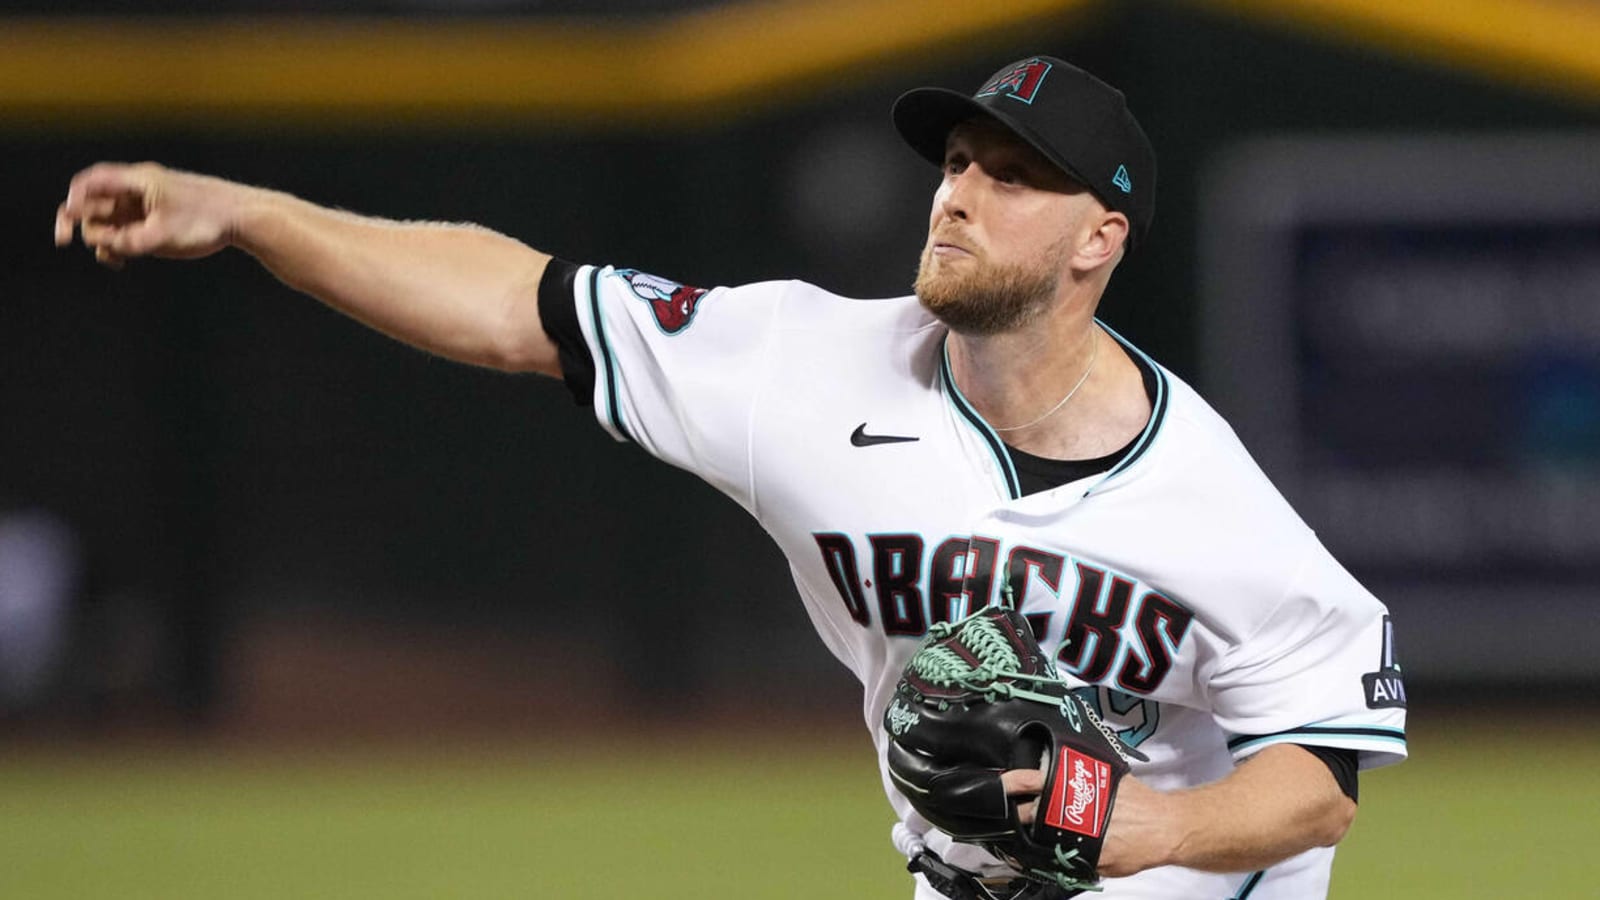 Having the best season of his career, this Diamondbacks pitcher deserves more credit for team's turnaround in 2023